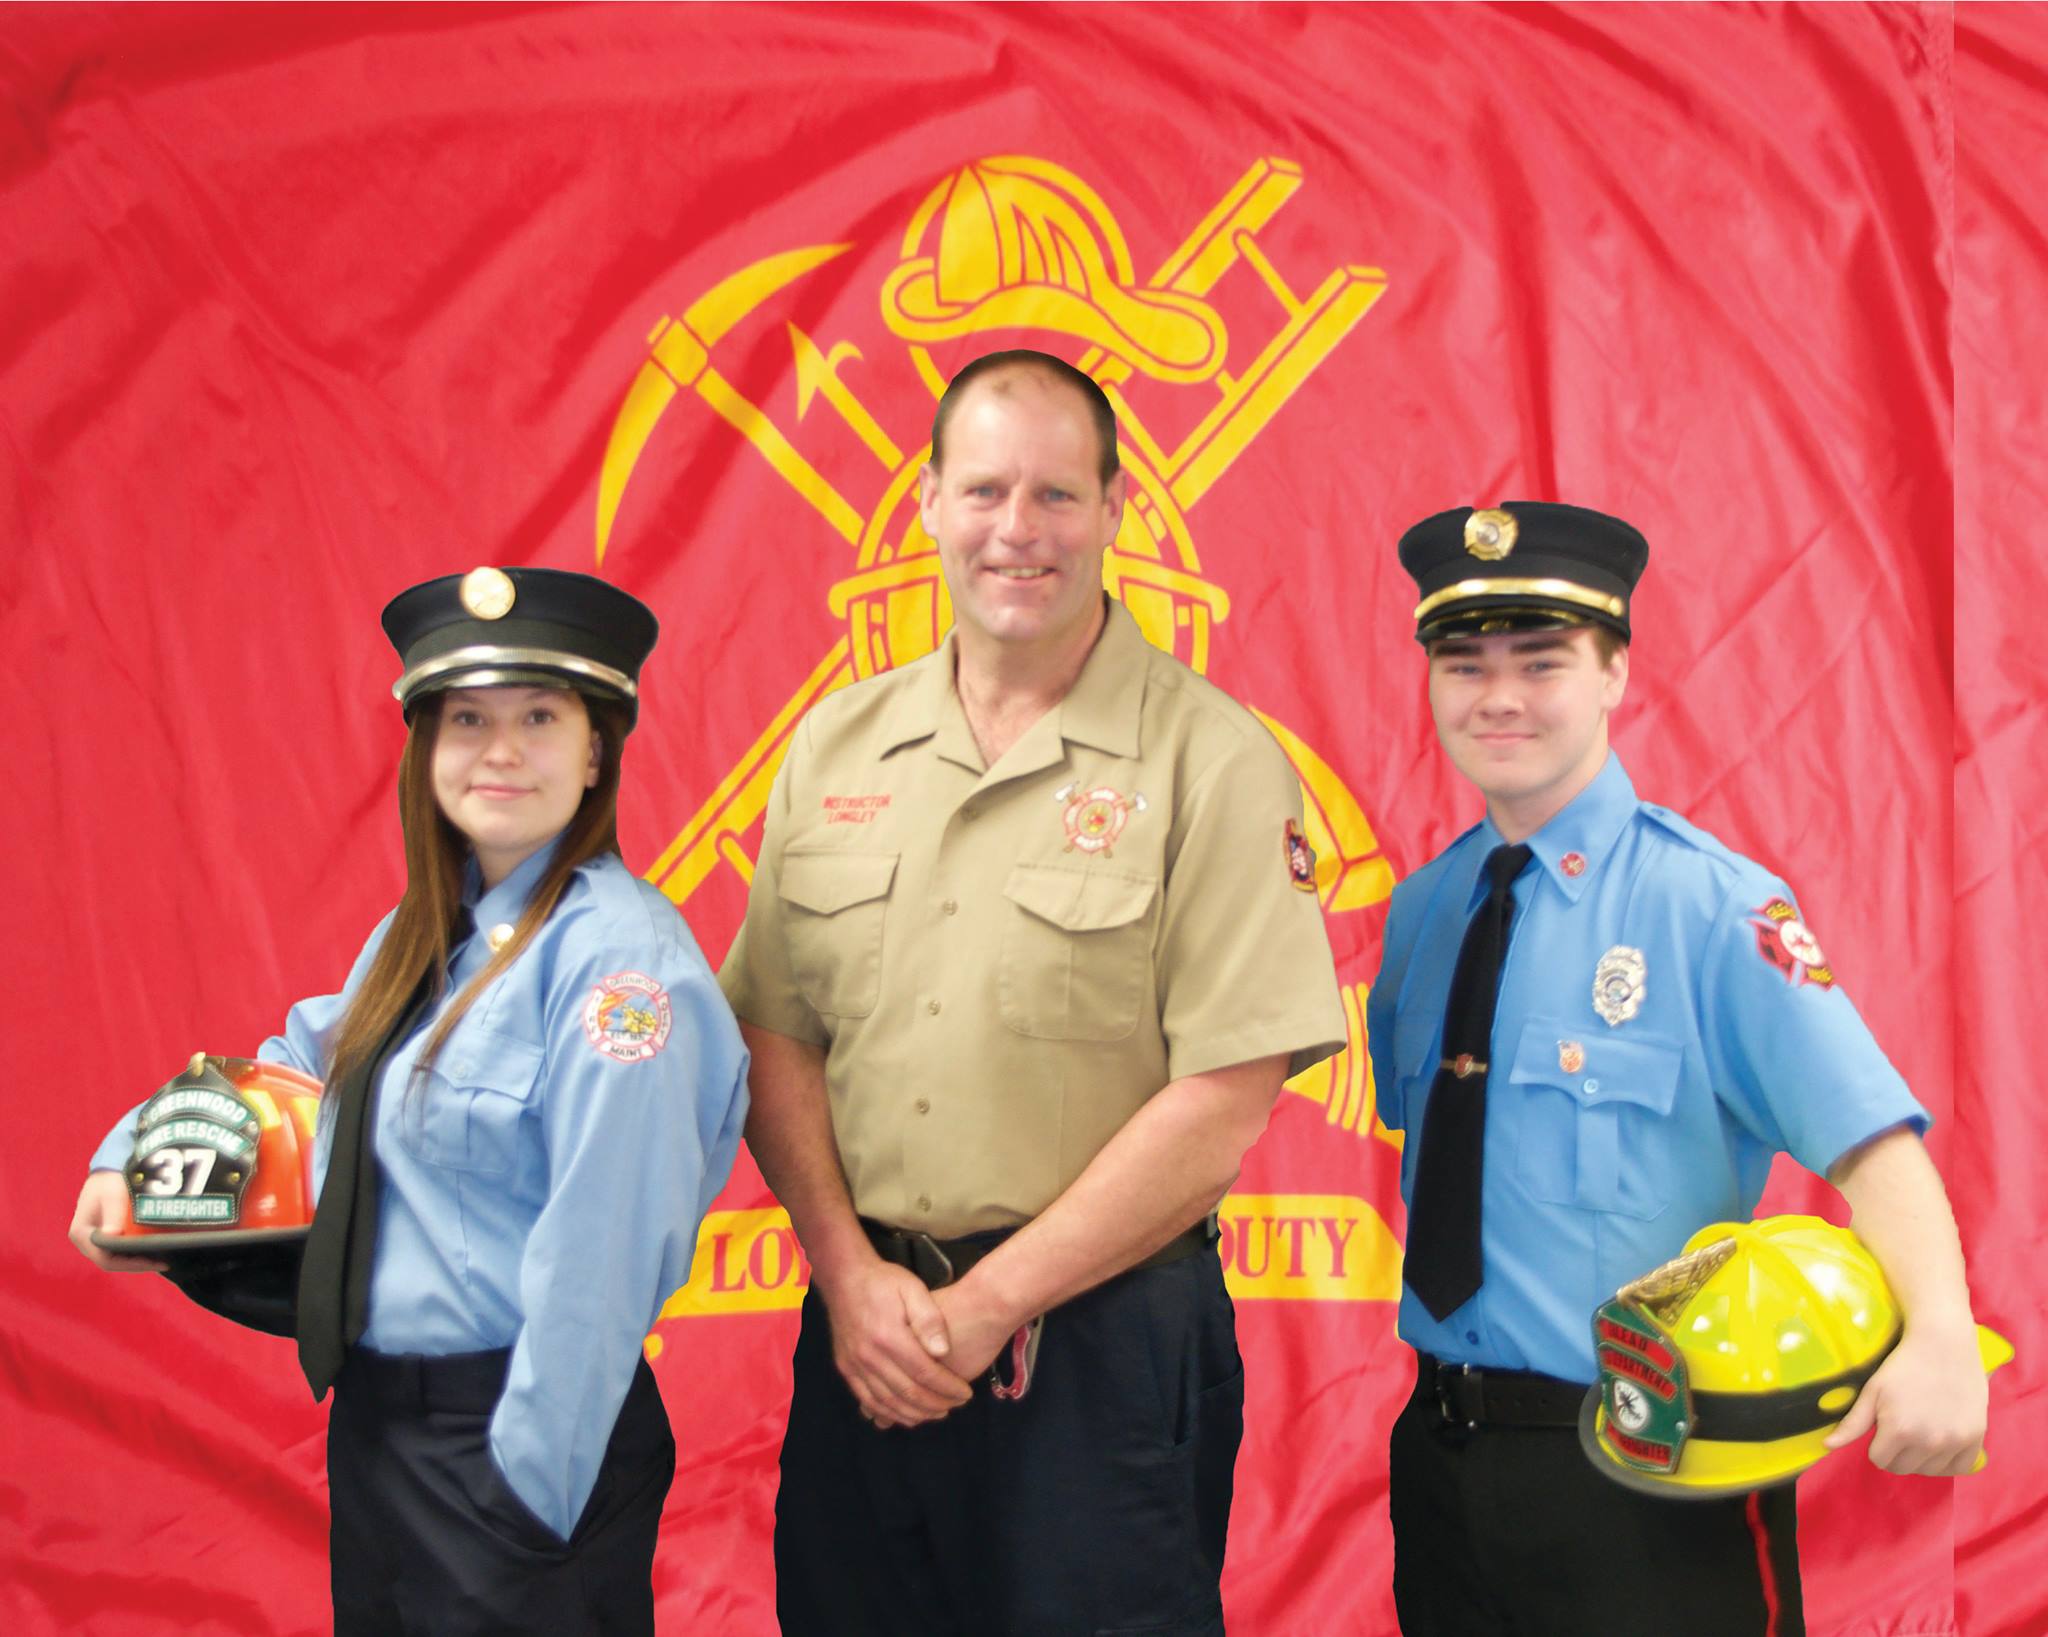 Mr. Longley with two Fire Science graduates in uniform